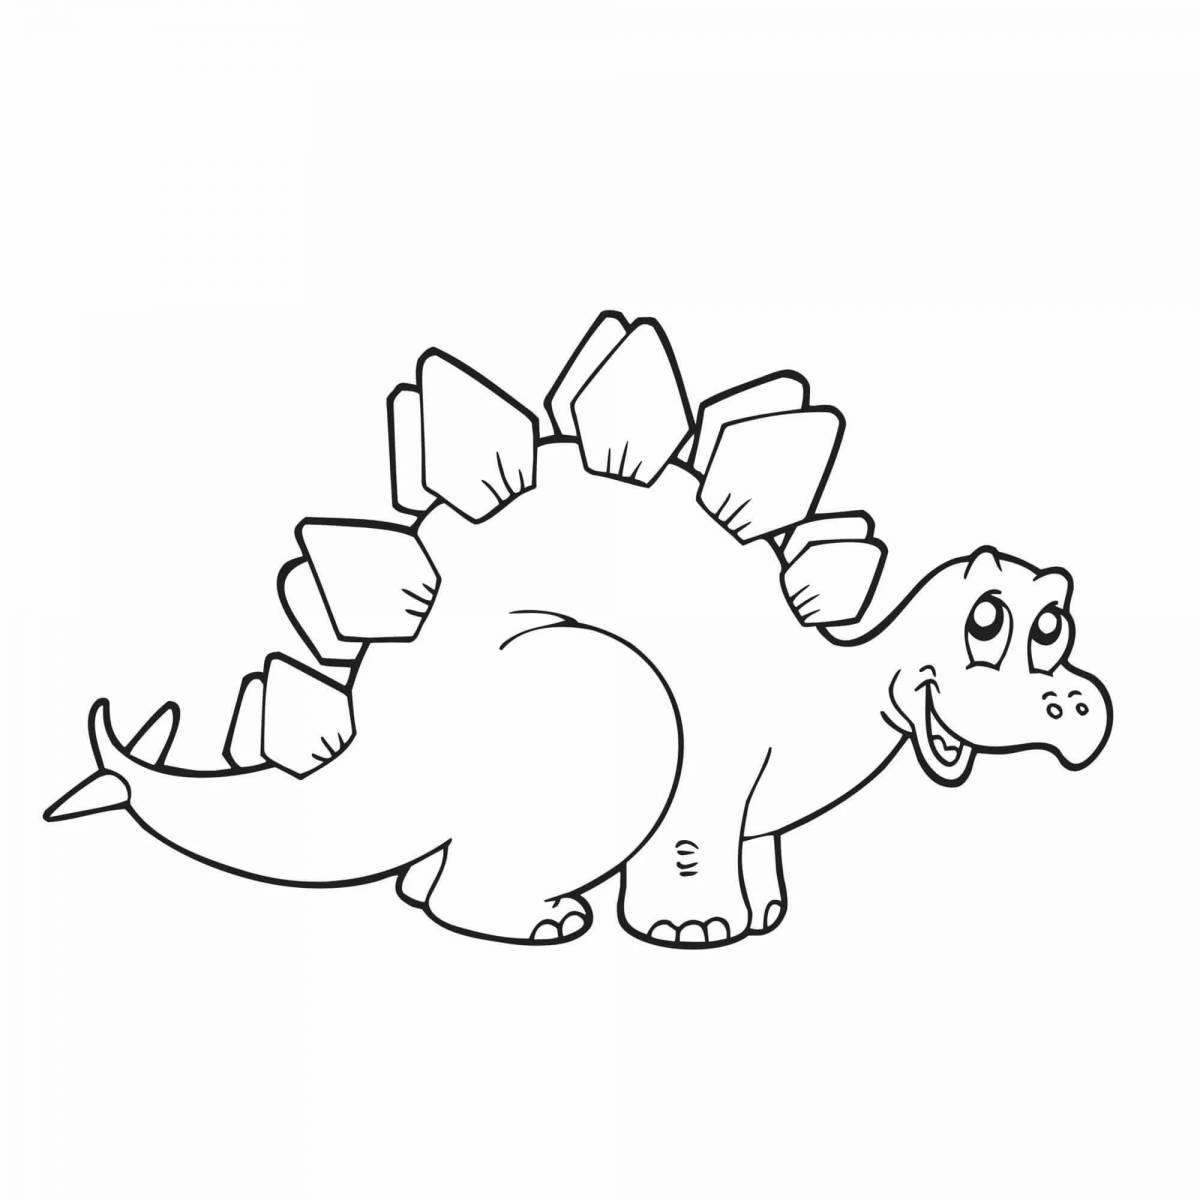 Coloring pages of dinosaurs